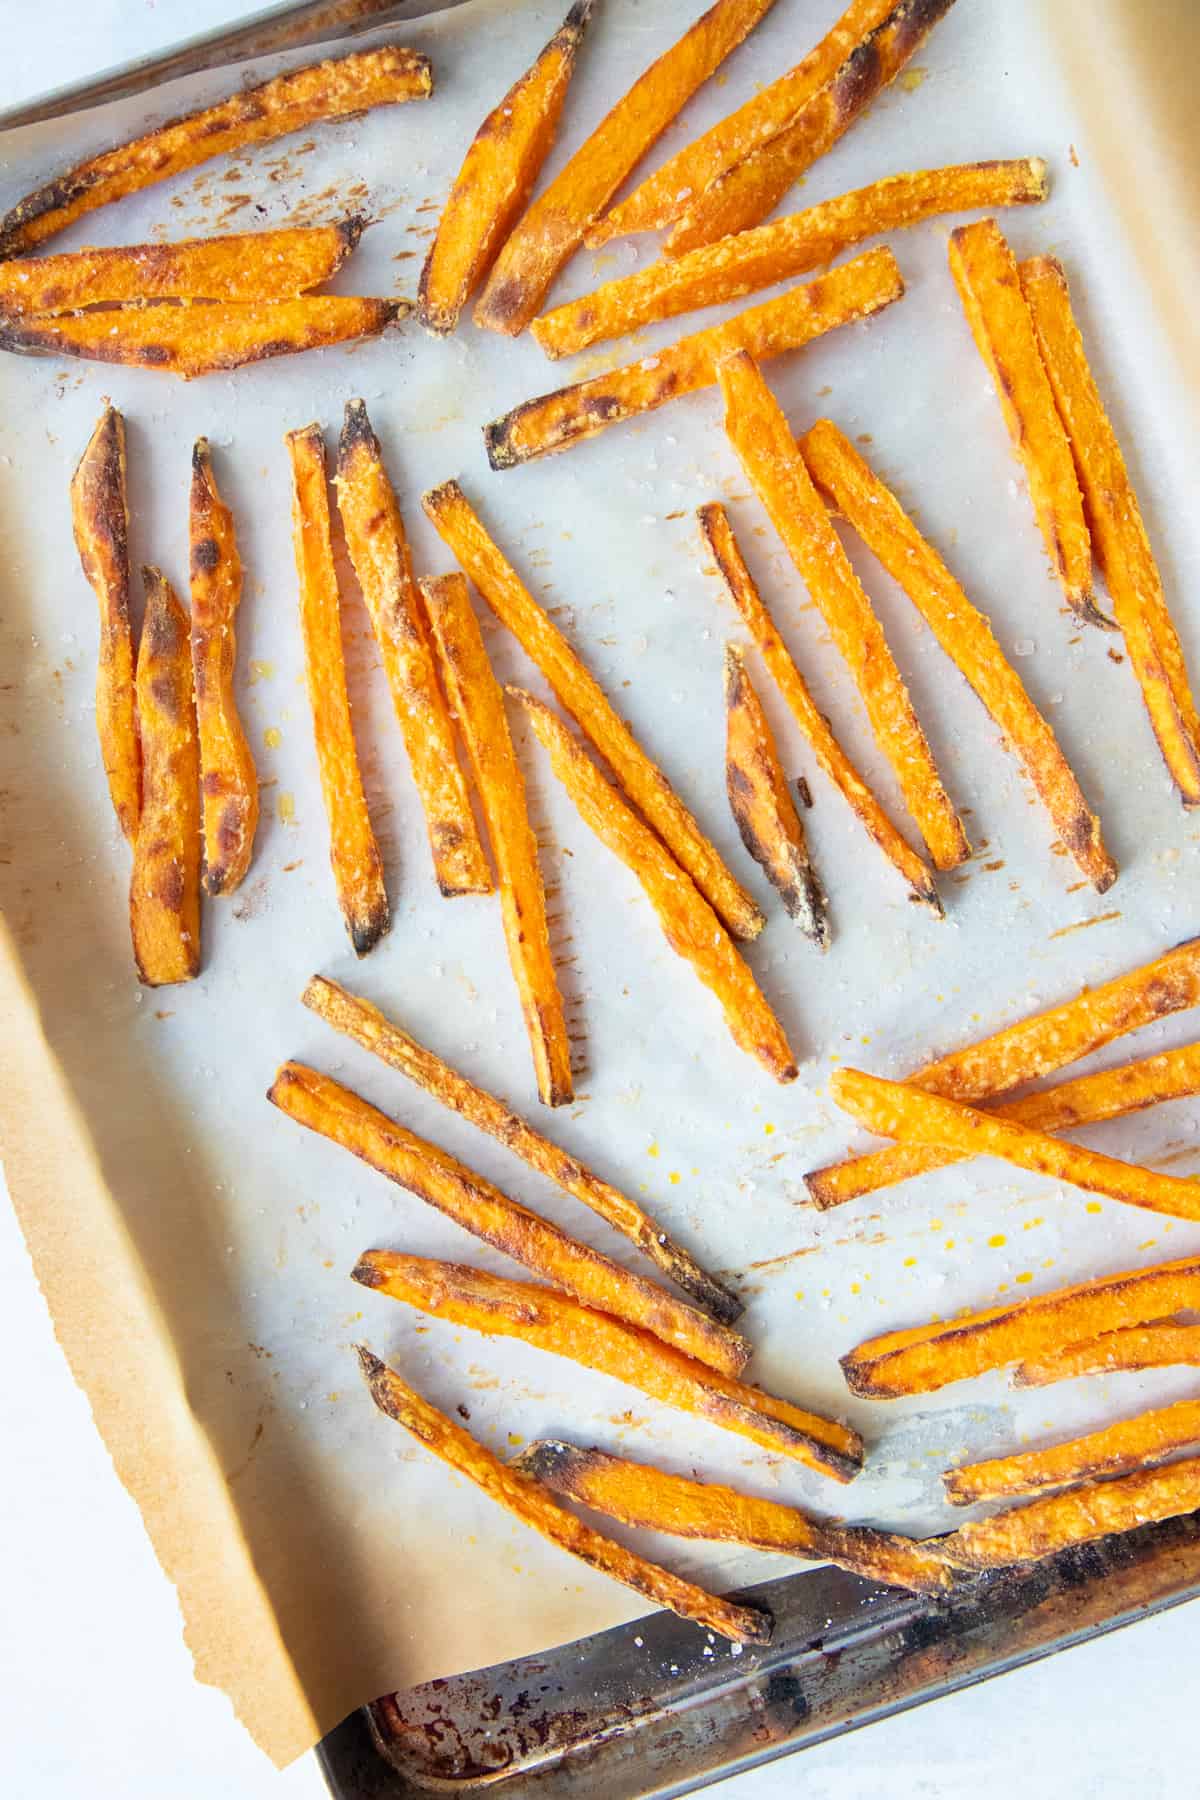 Baked sweet potato fries spread out on a baking sheet lined with parchment paper.